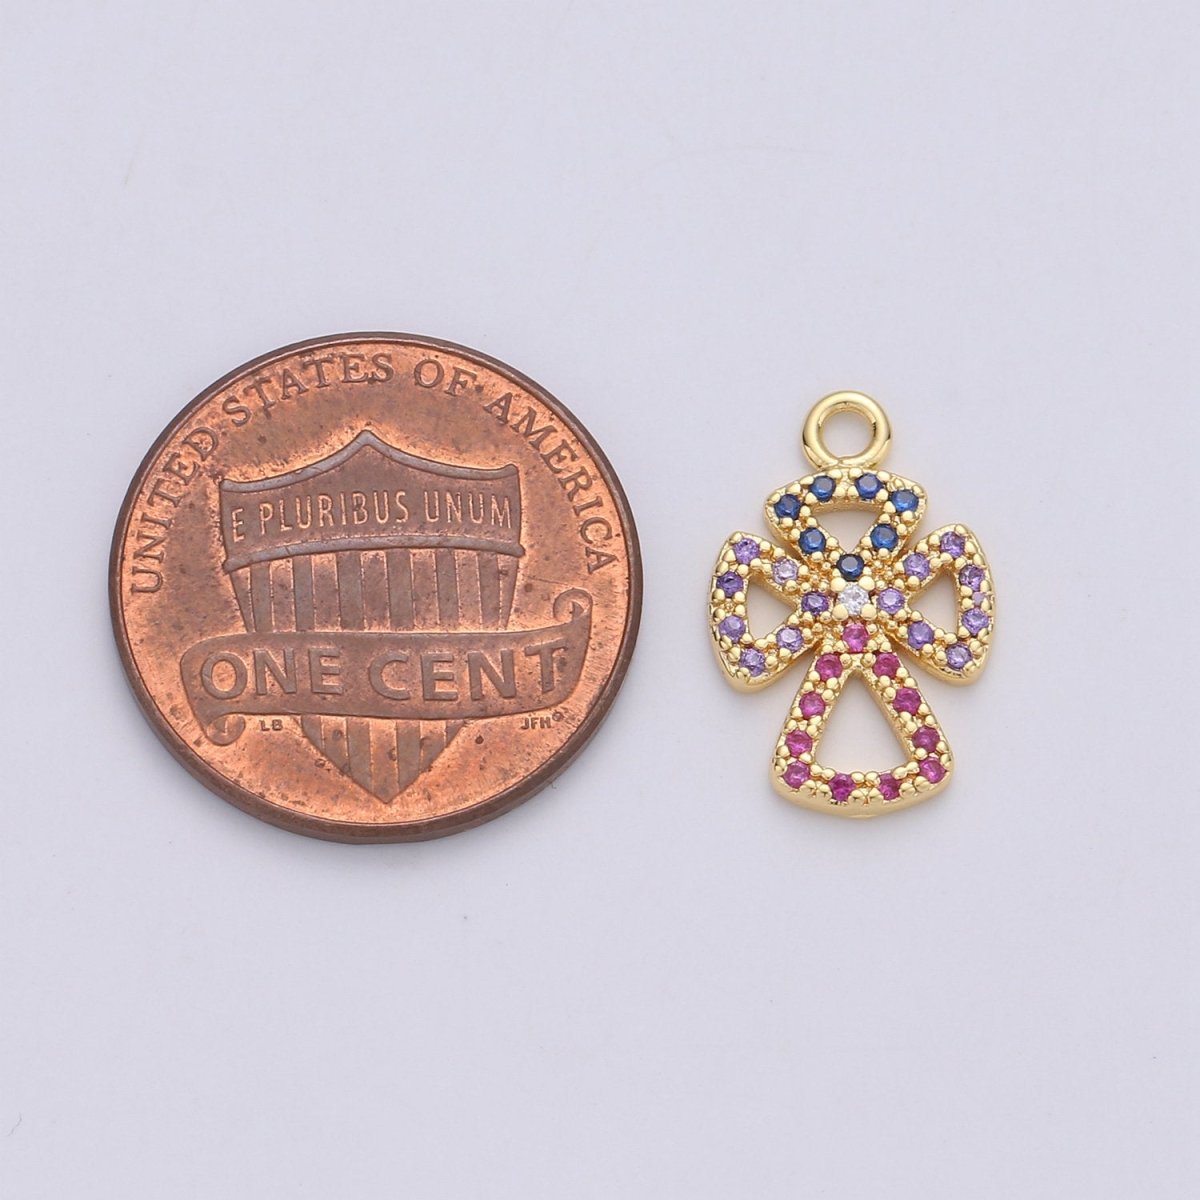 Dainty Gold Cross Charm Micro Pave Cross Charm Cubic Multi Color CZ Cross charm for Bracelet earring Necklace Component Supply C-882 - DLUXCA